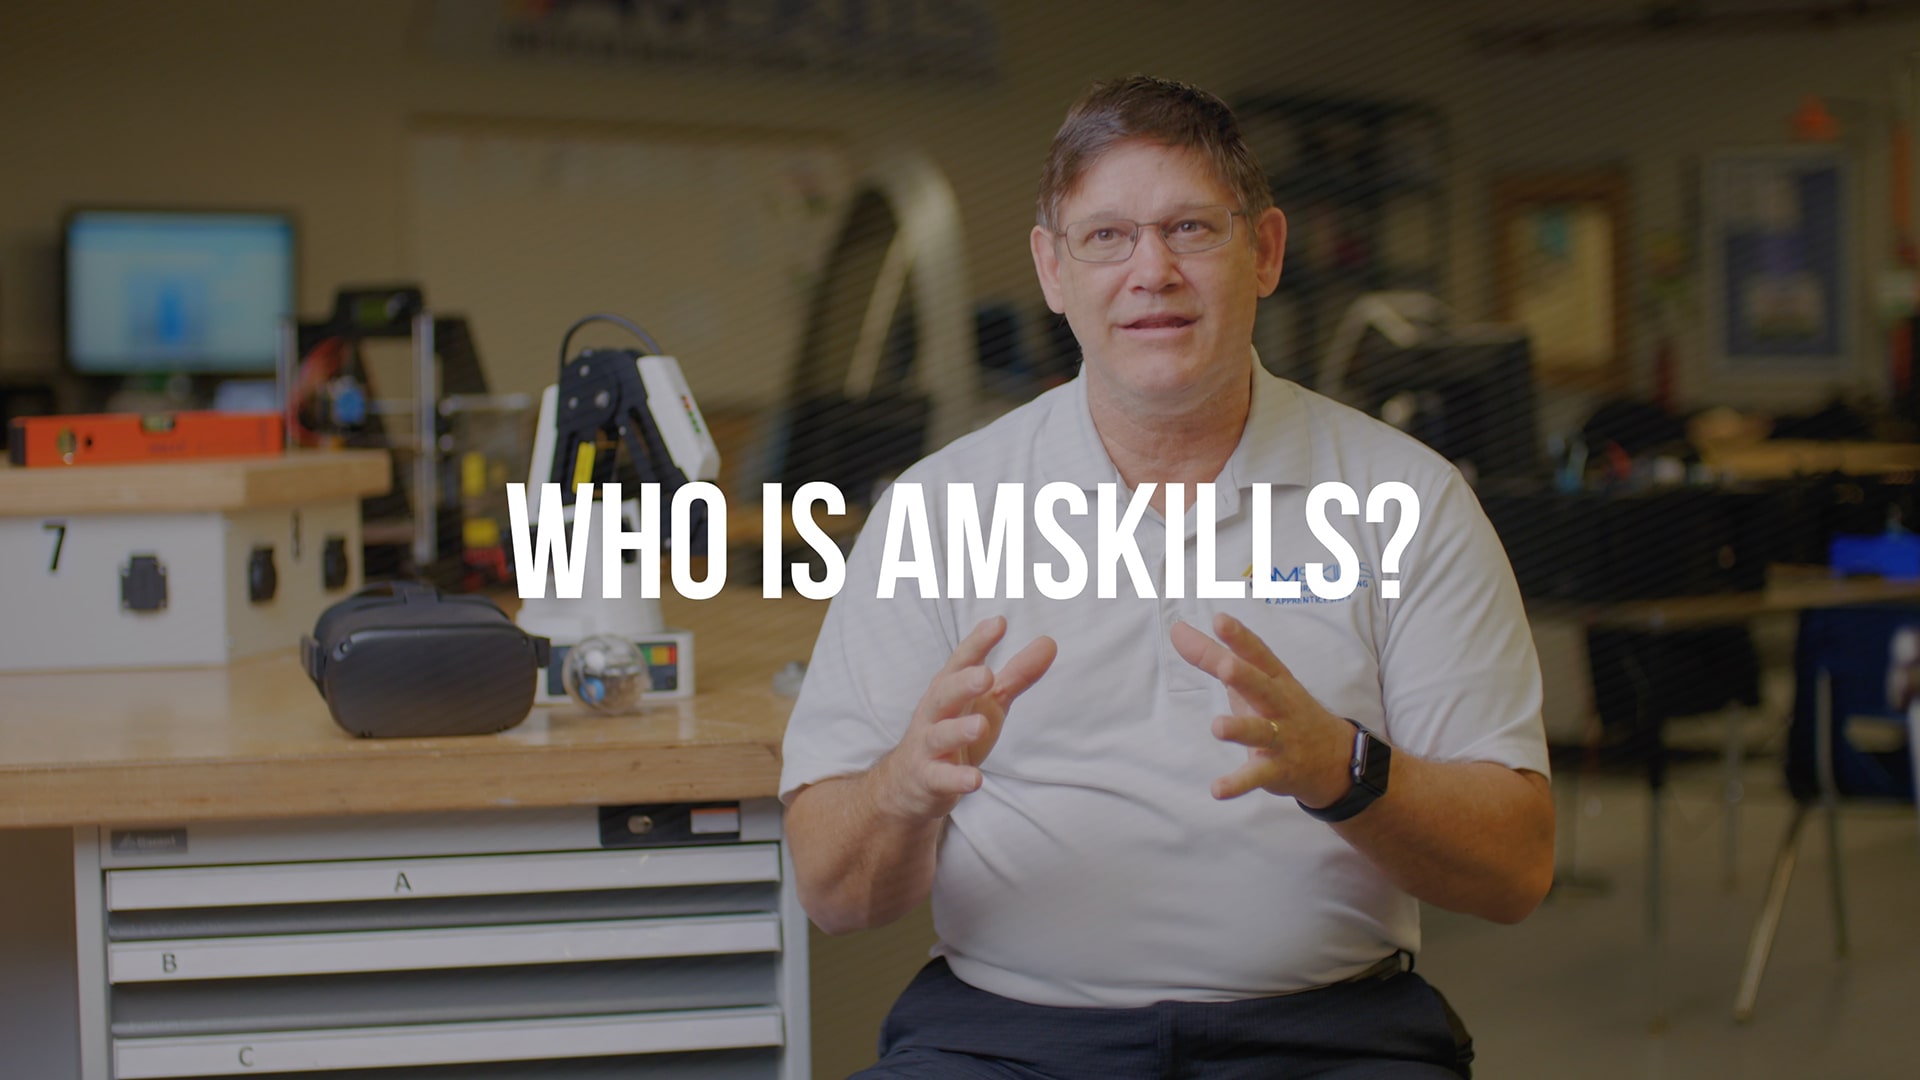 AMSkills Overview